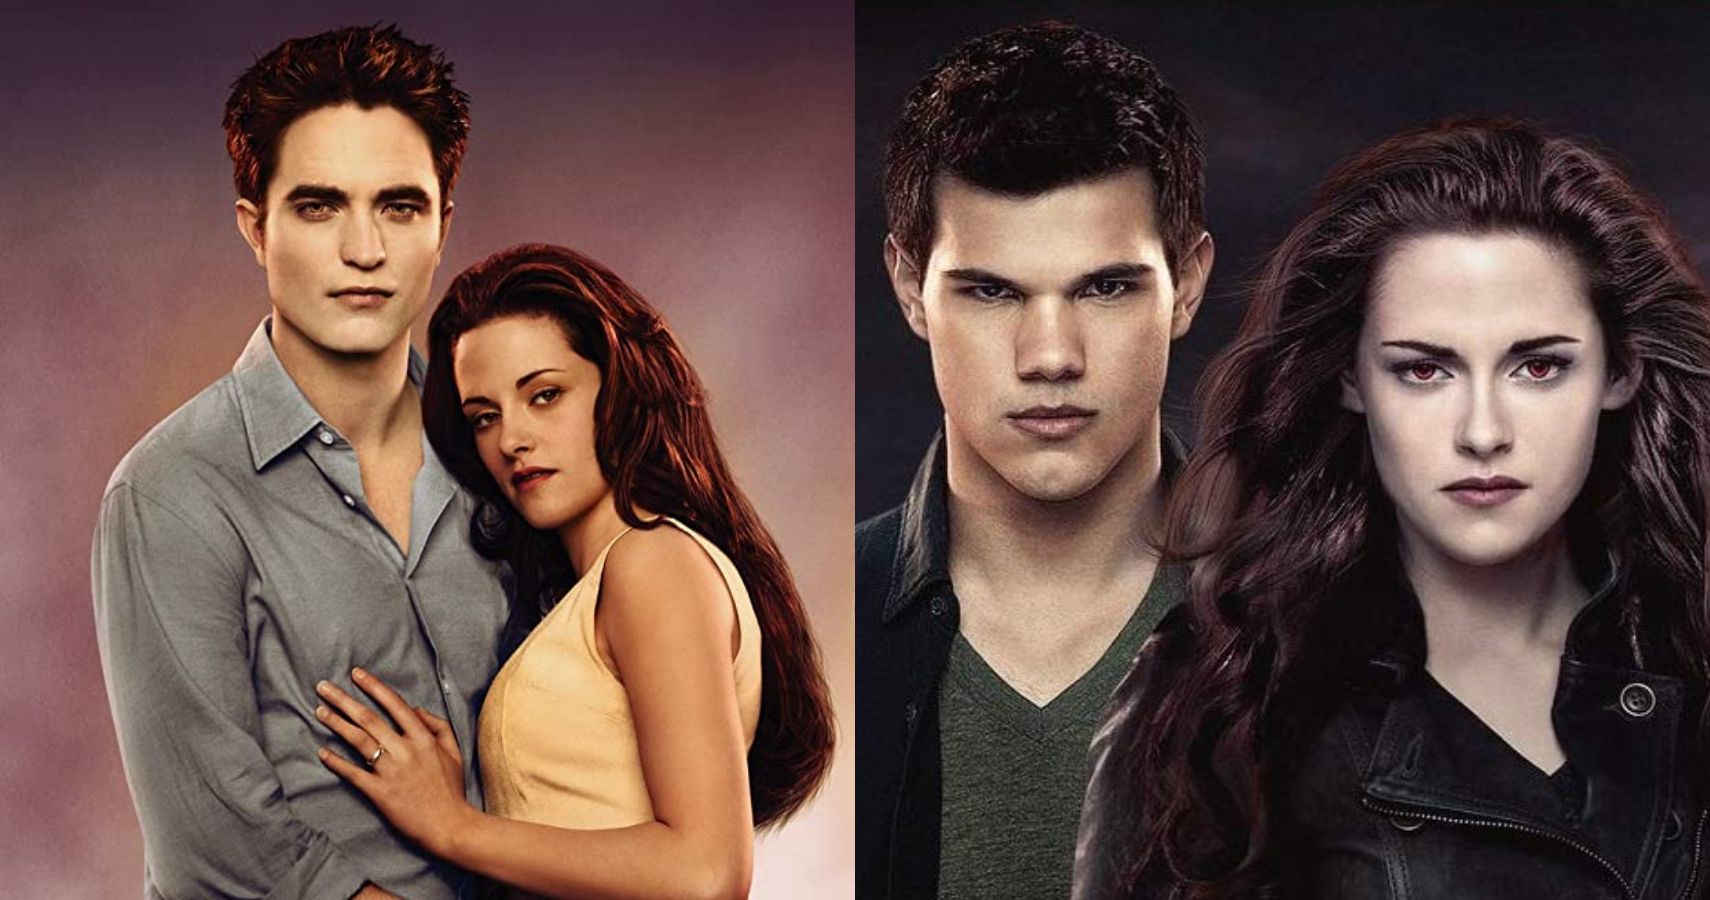 split image of Edward and Bella and Jacob and Bella, all looking into camera